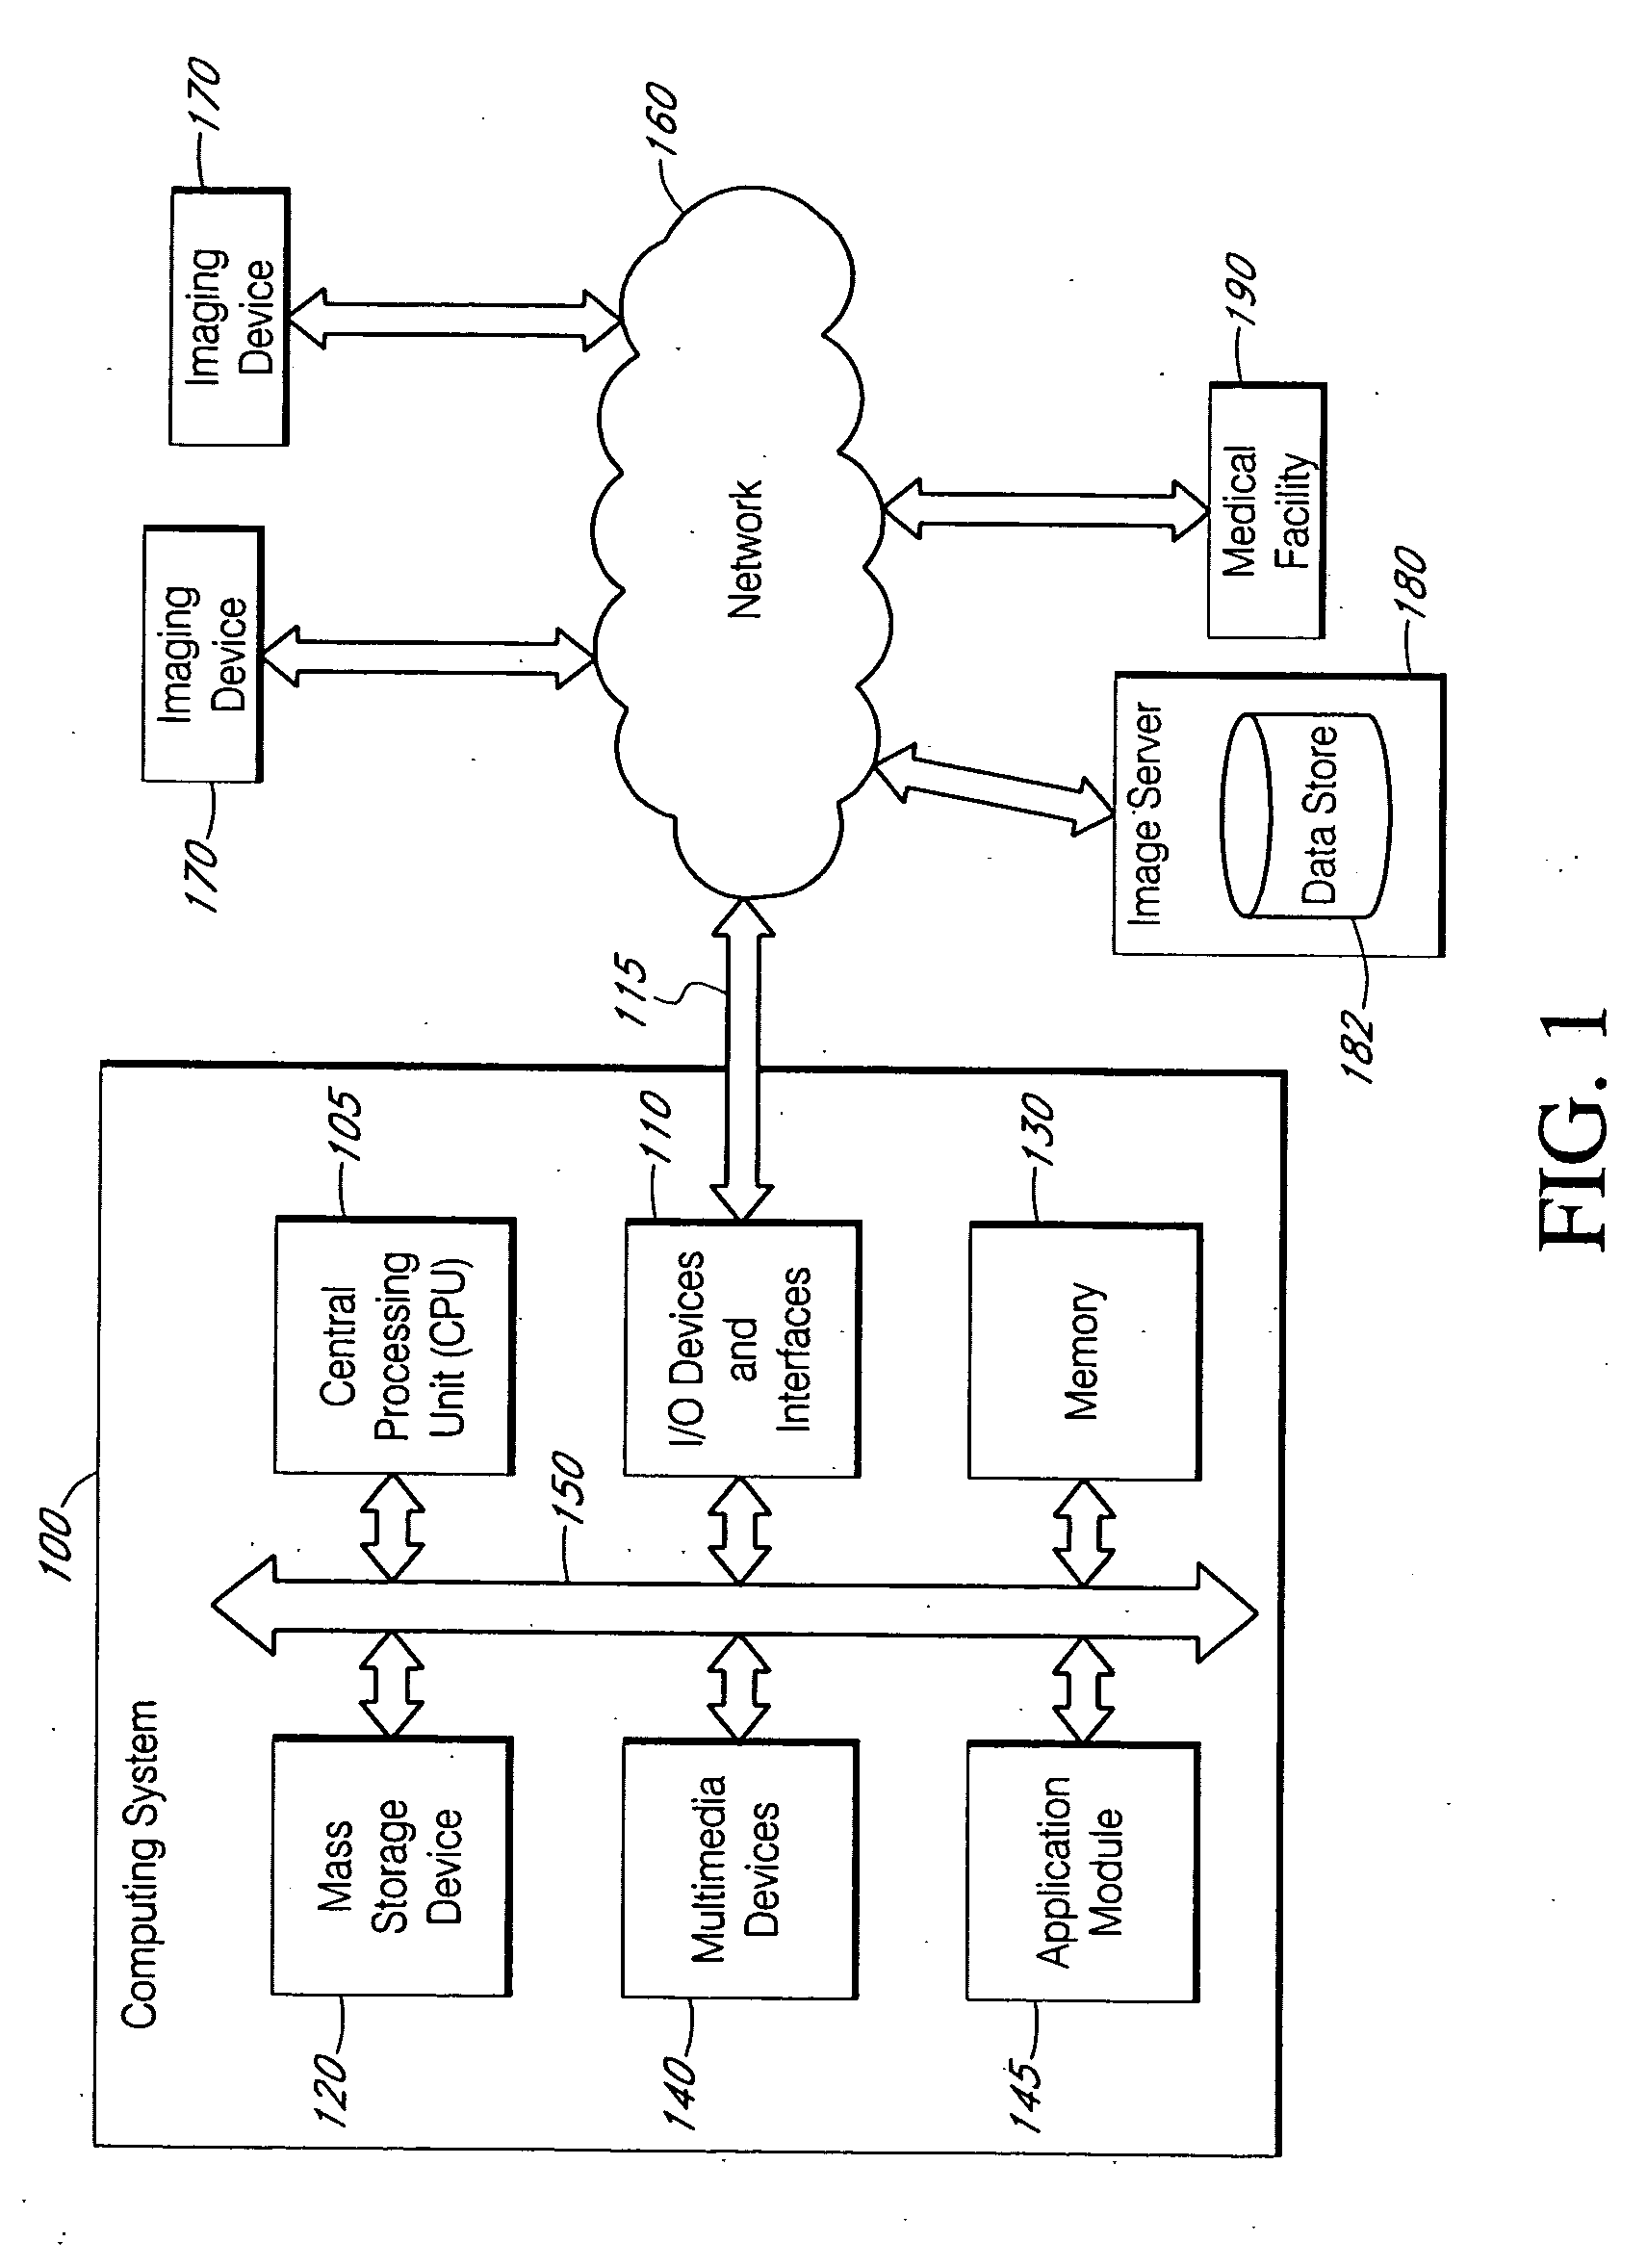 Systems and methods for interleaving series of medical images